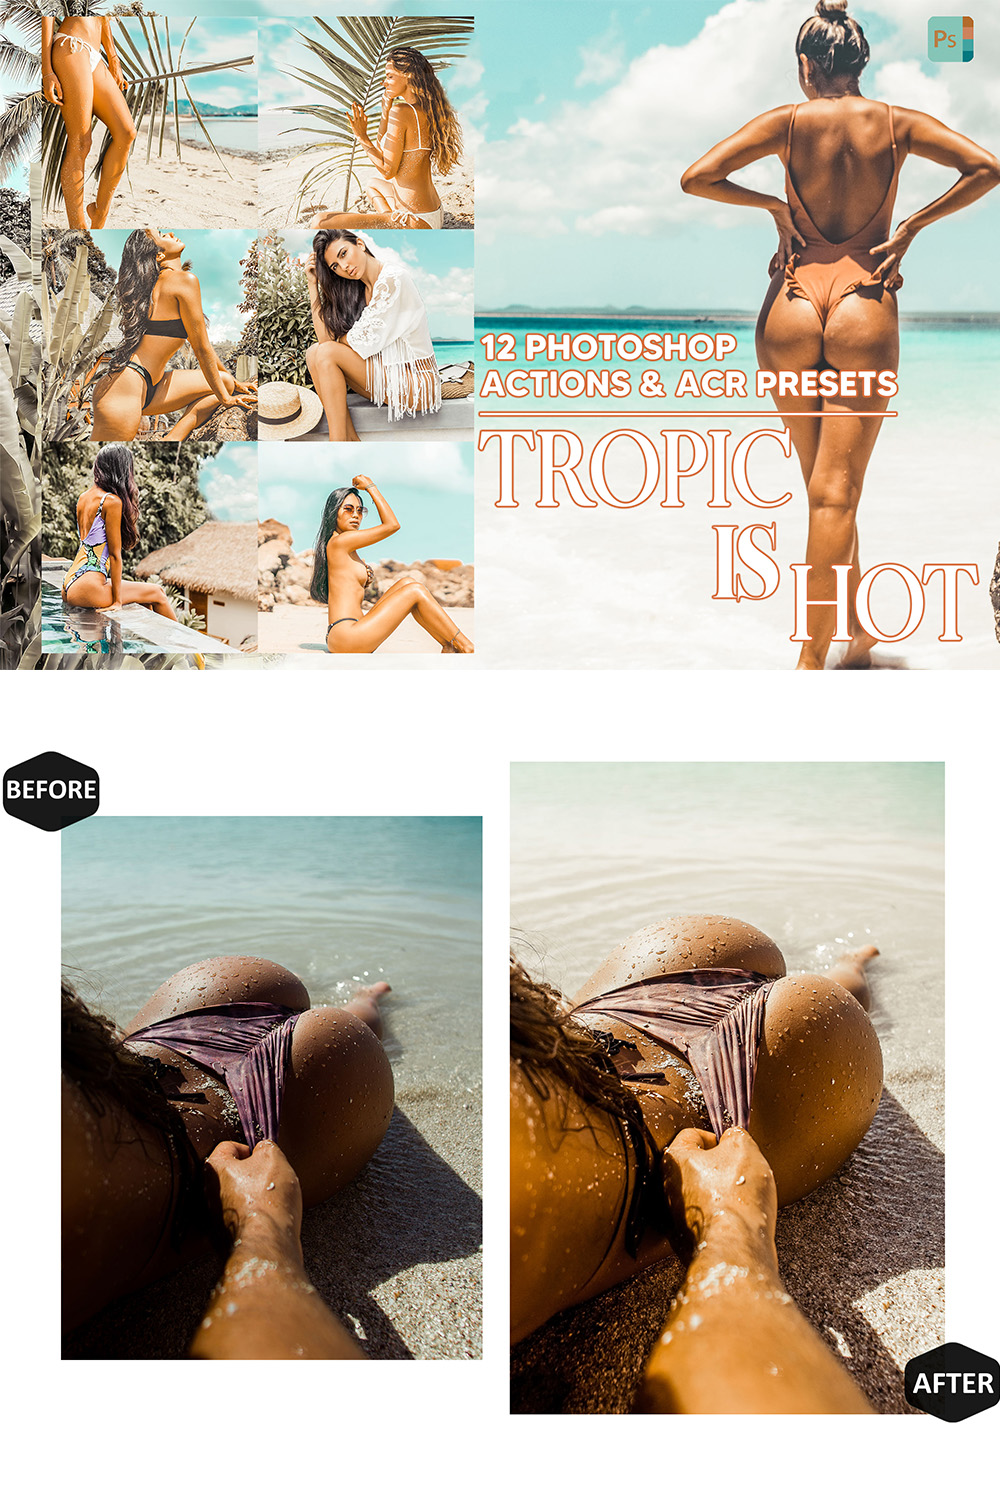 12 Photoshop Actions, Tropic Is Hot Ps Action, Summer ACR Preset, Beach Ps Filter, Atn Portrait And Lifestyle Theme For Instagram, Blogger pinterest preview image.